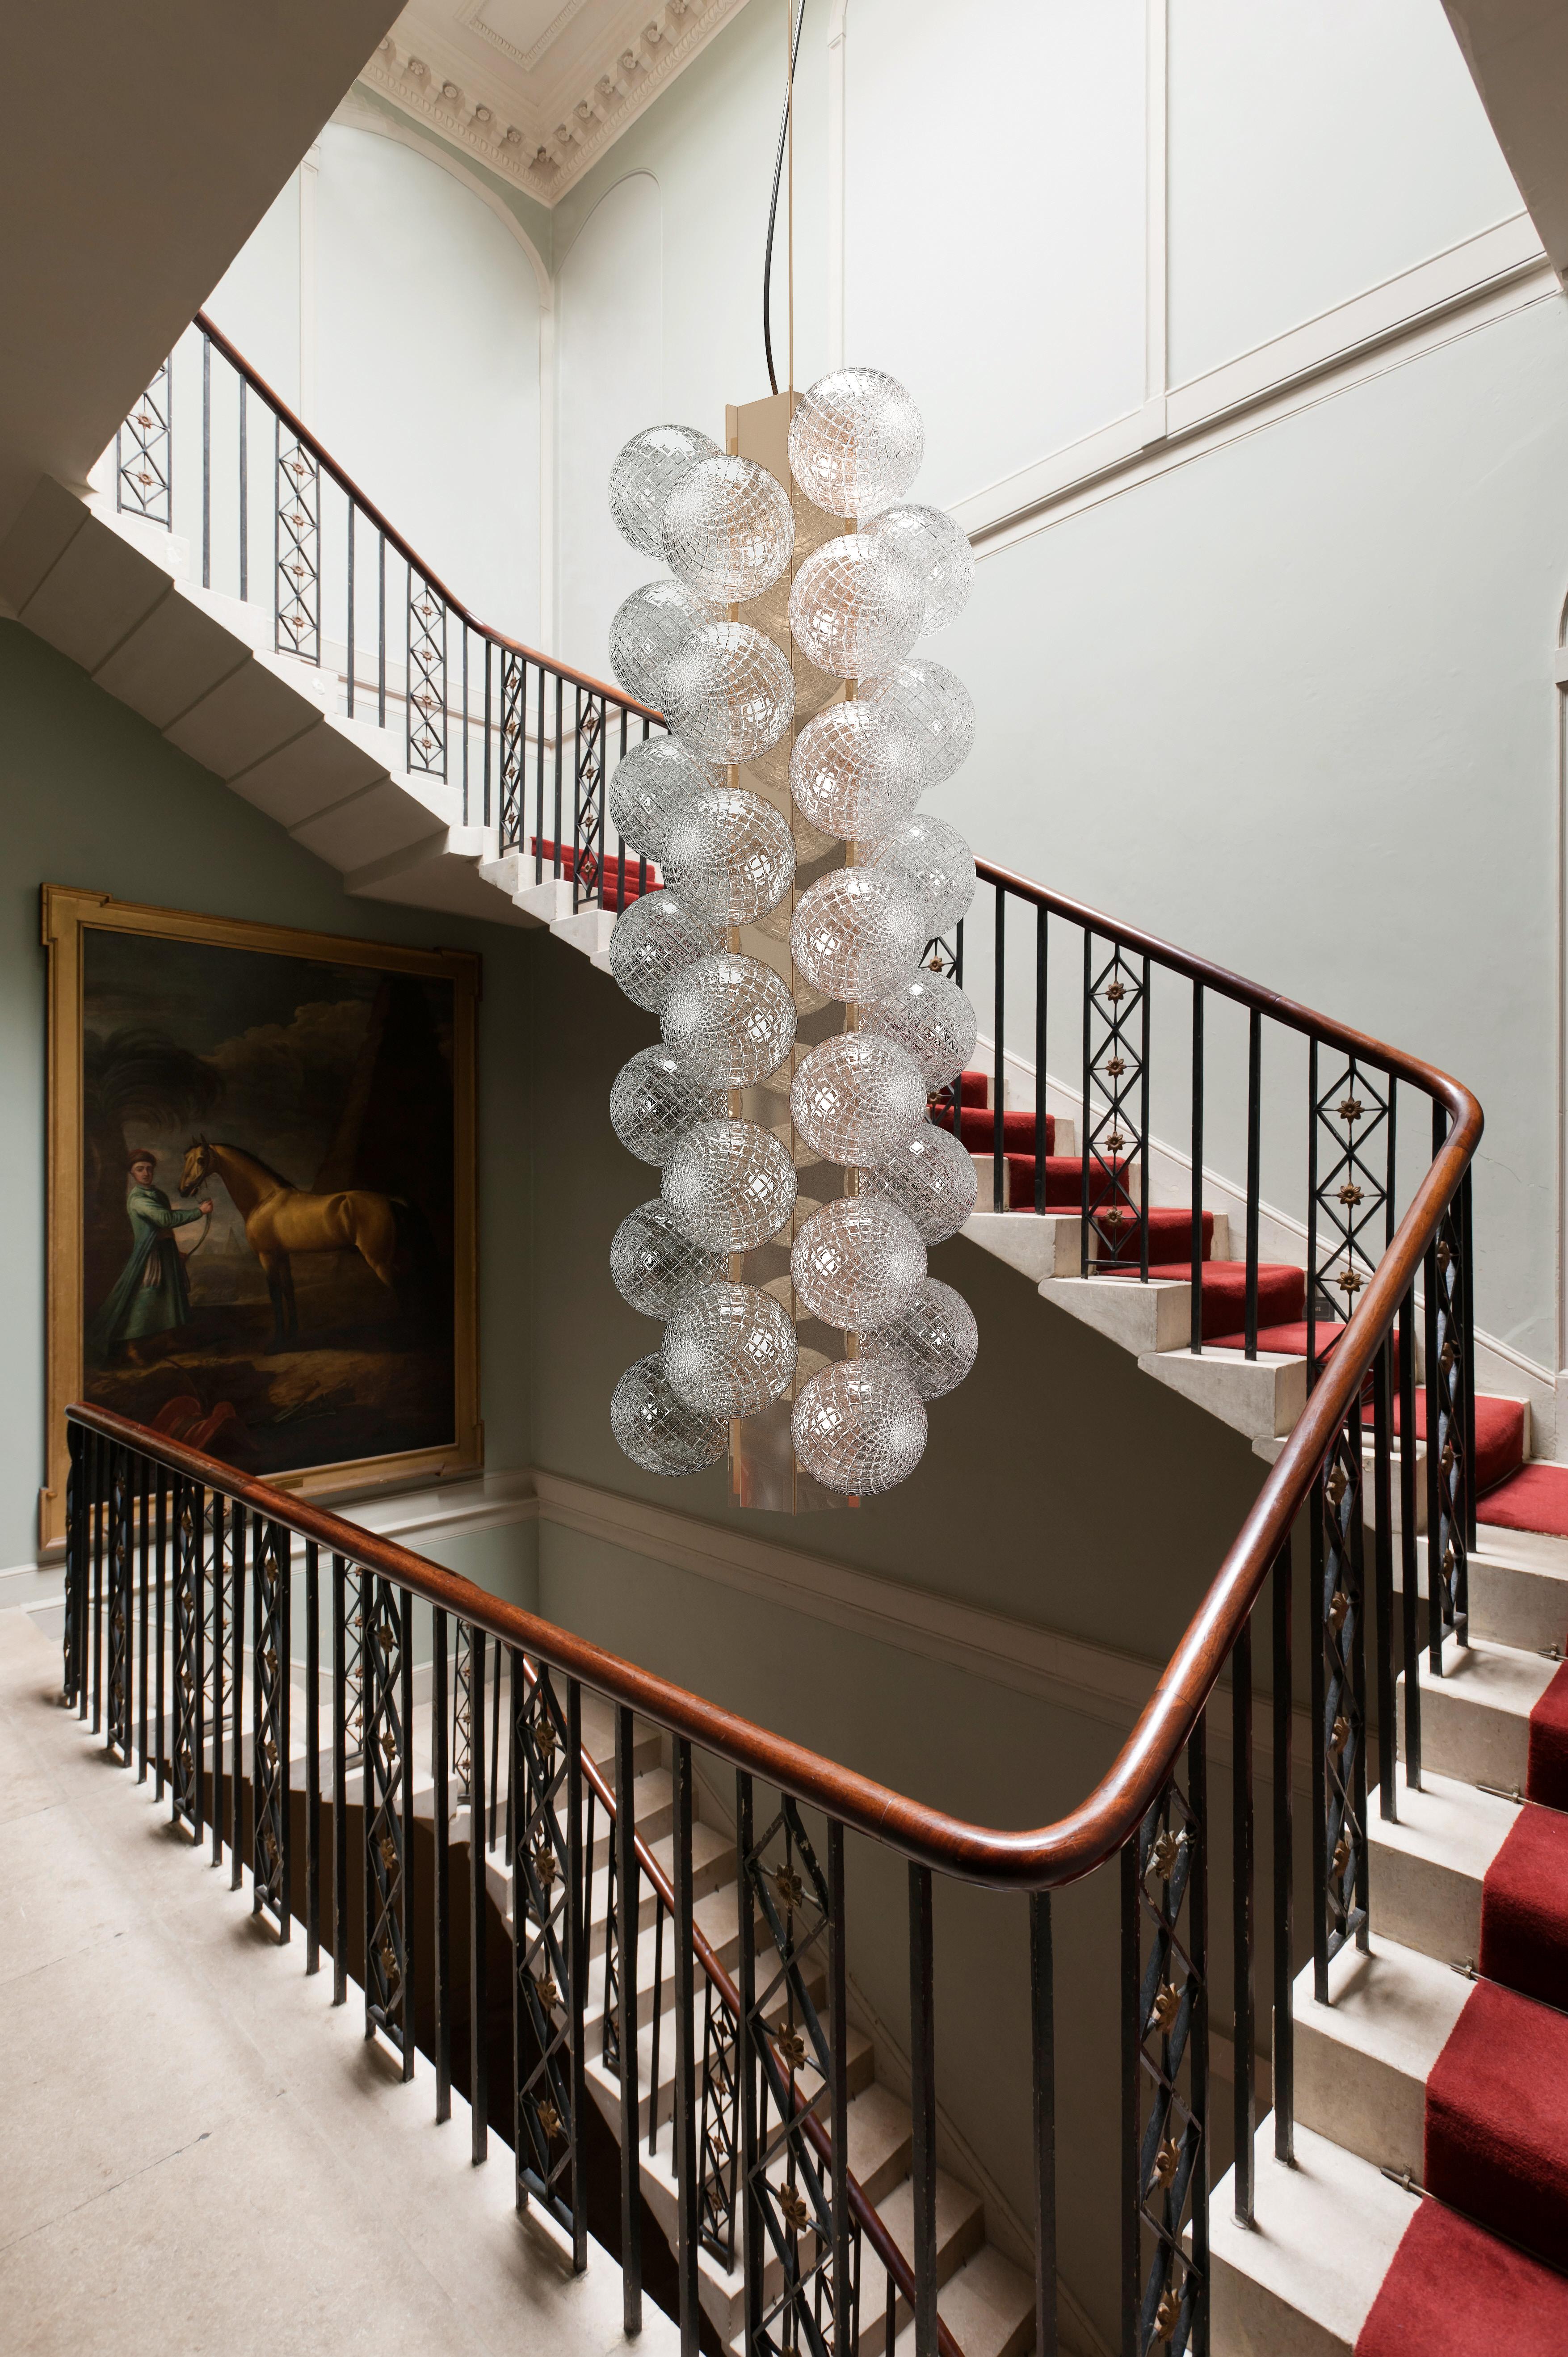 Inspired by Philip Johnsons interiors, the sophisticated vertical suspension Lincoln is elegant but discreetly playful. The blown glass spheres, applied alternately on either side of the central structure, are worked with the balotòn technique which